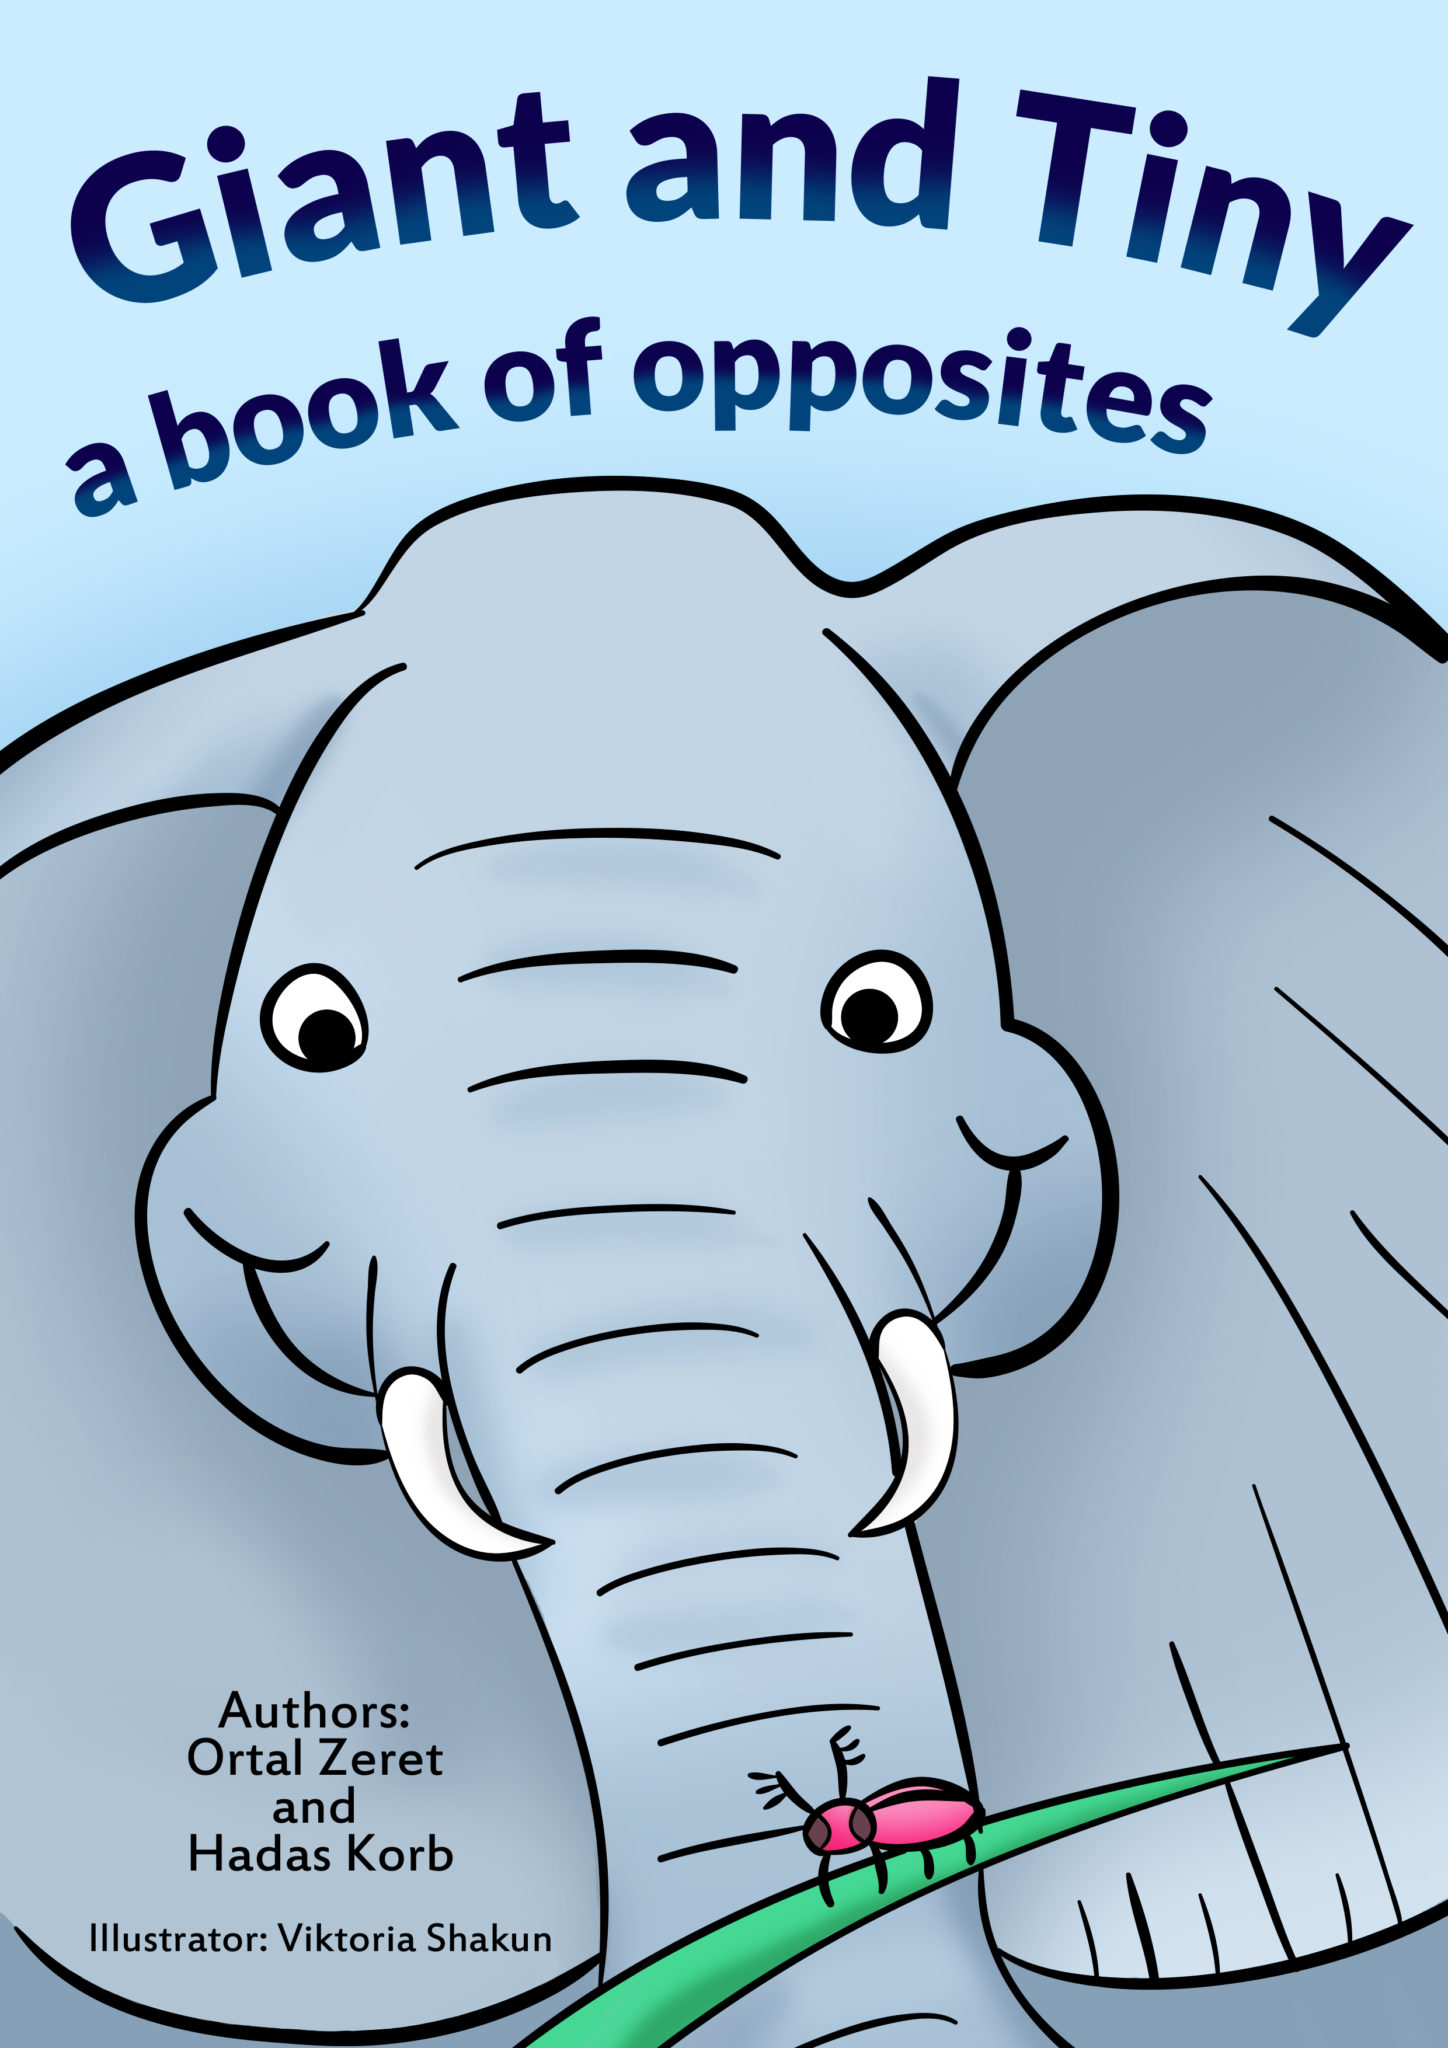 FREE: Giant and Tiny: a book of opposites by Hadas Korb and Ortal Zeret